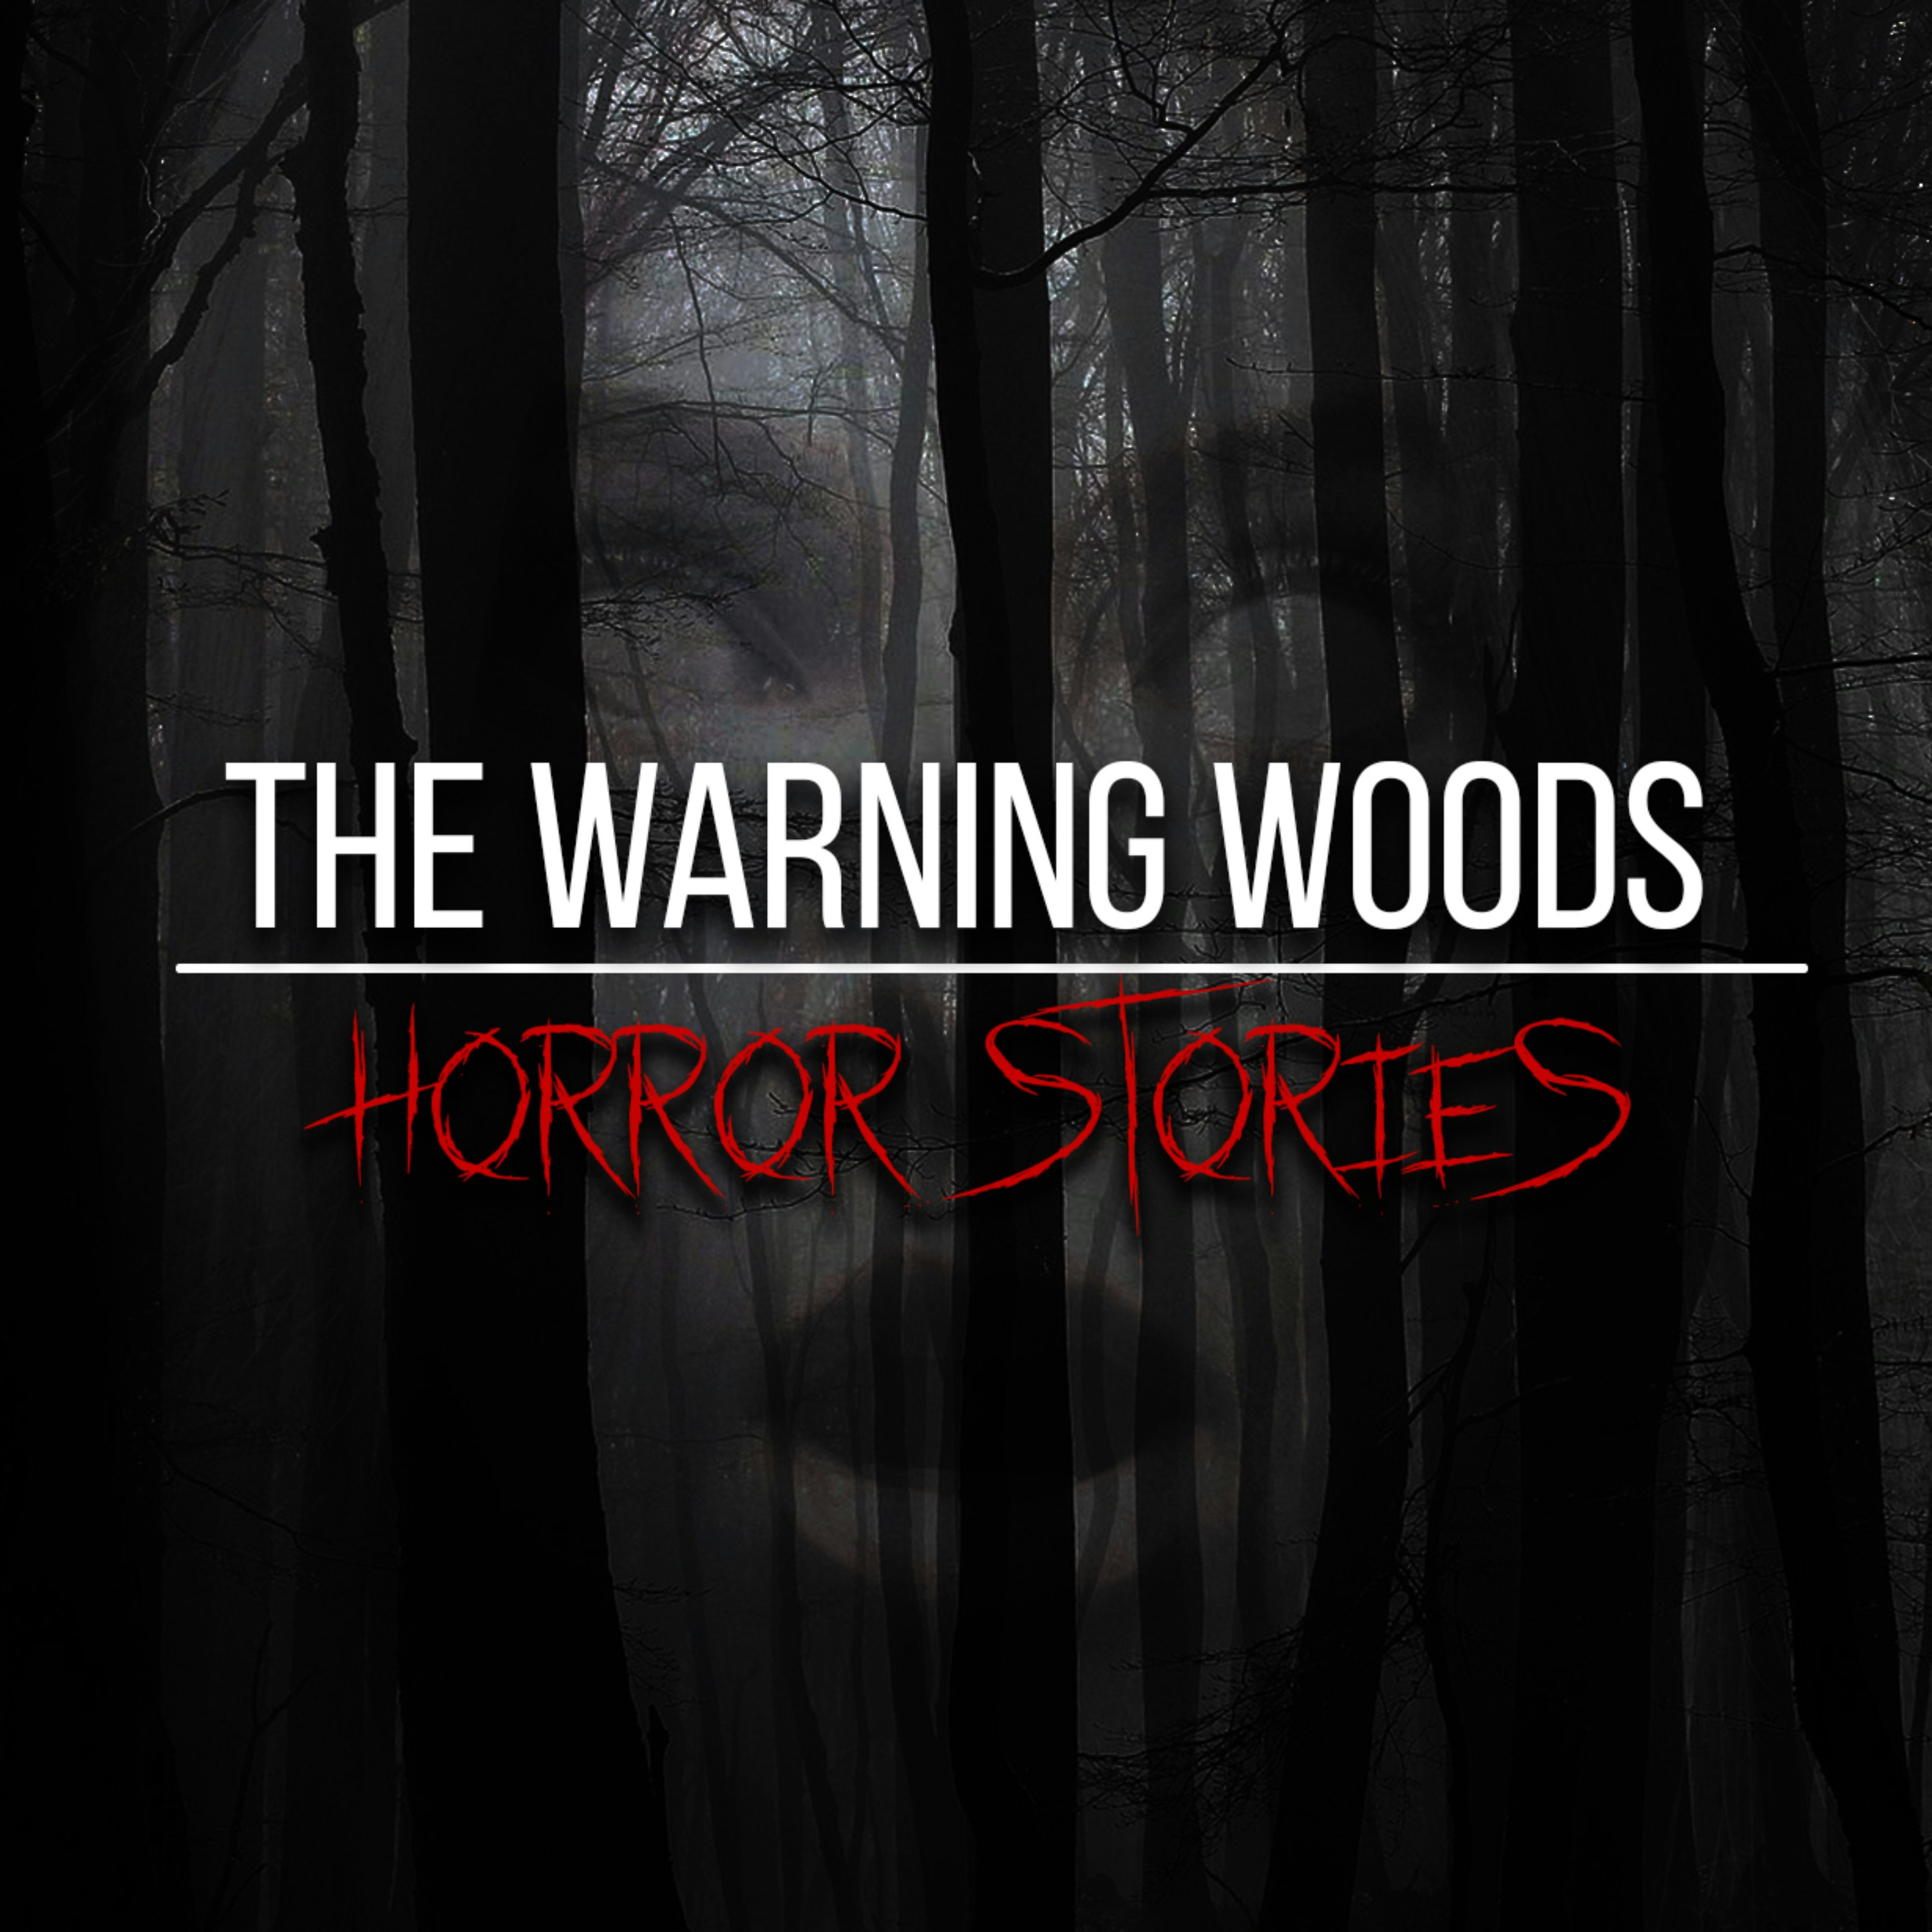 The Warning Woods Horror and Scary Stories